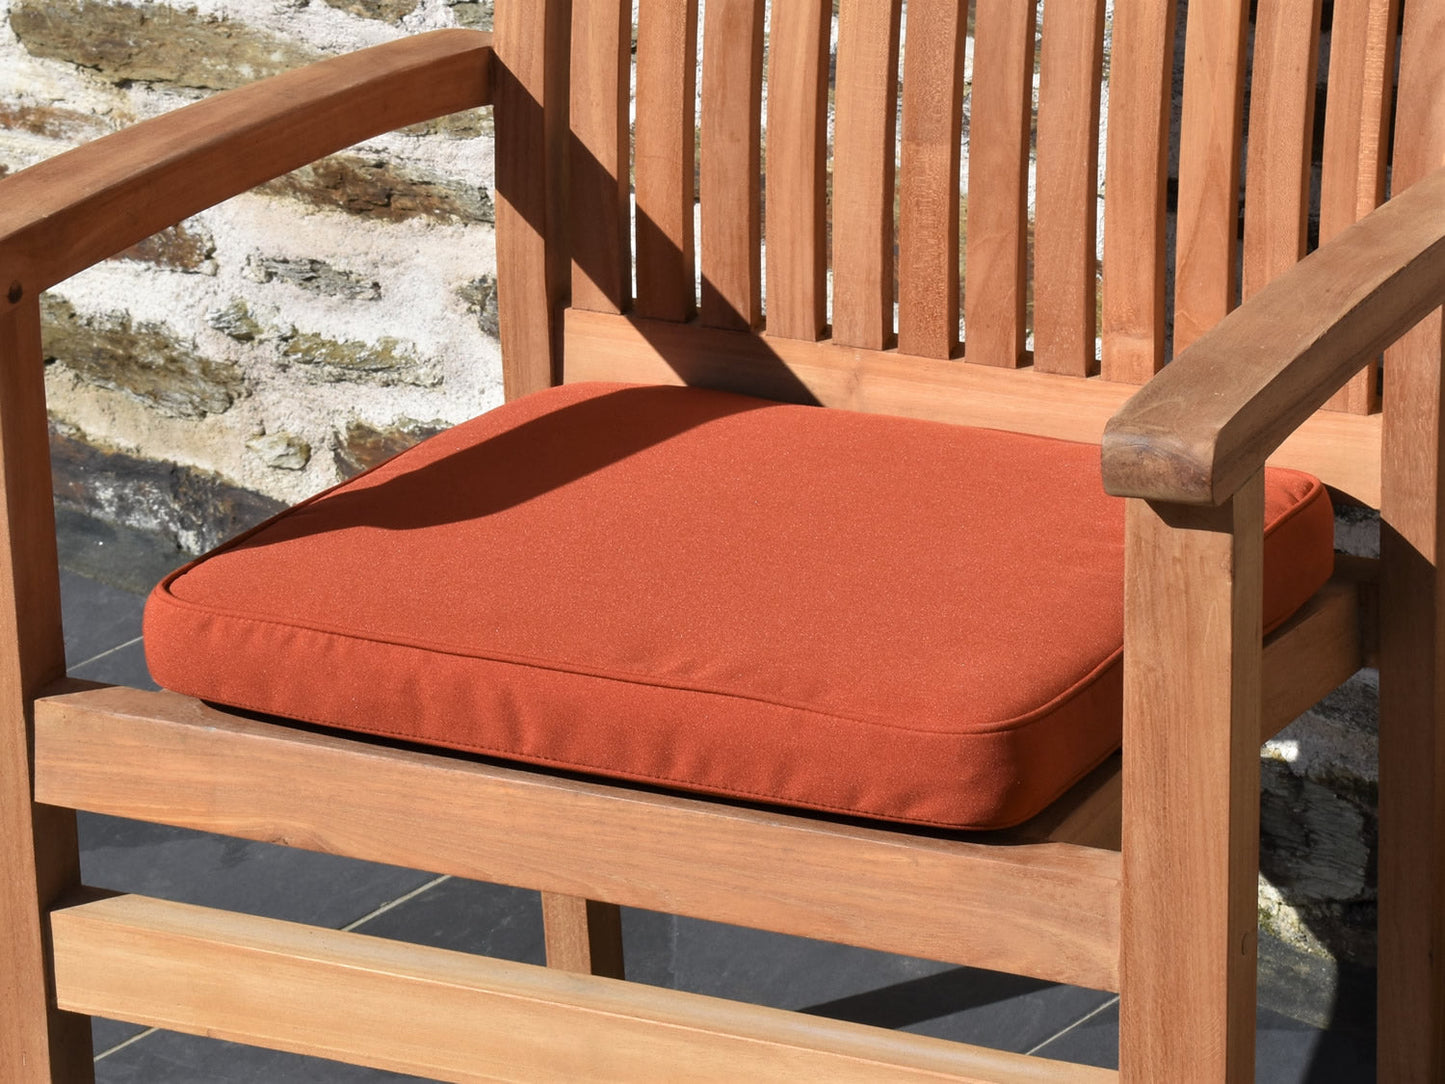 Large outdoor garden seat pad Terracotta, close view